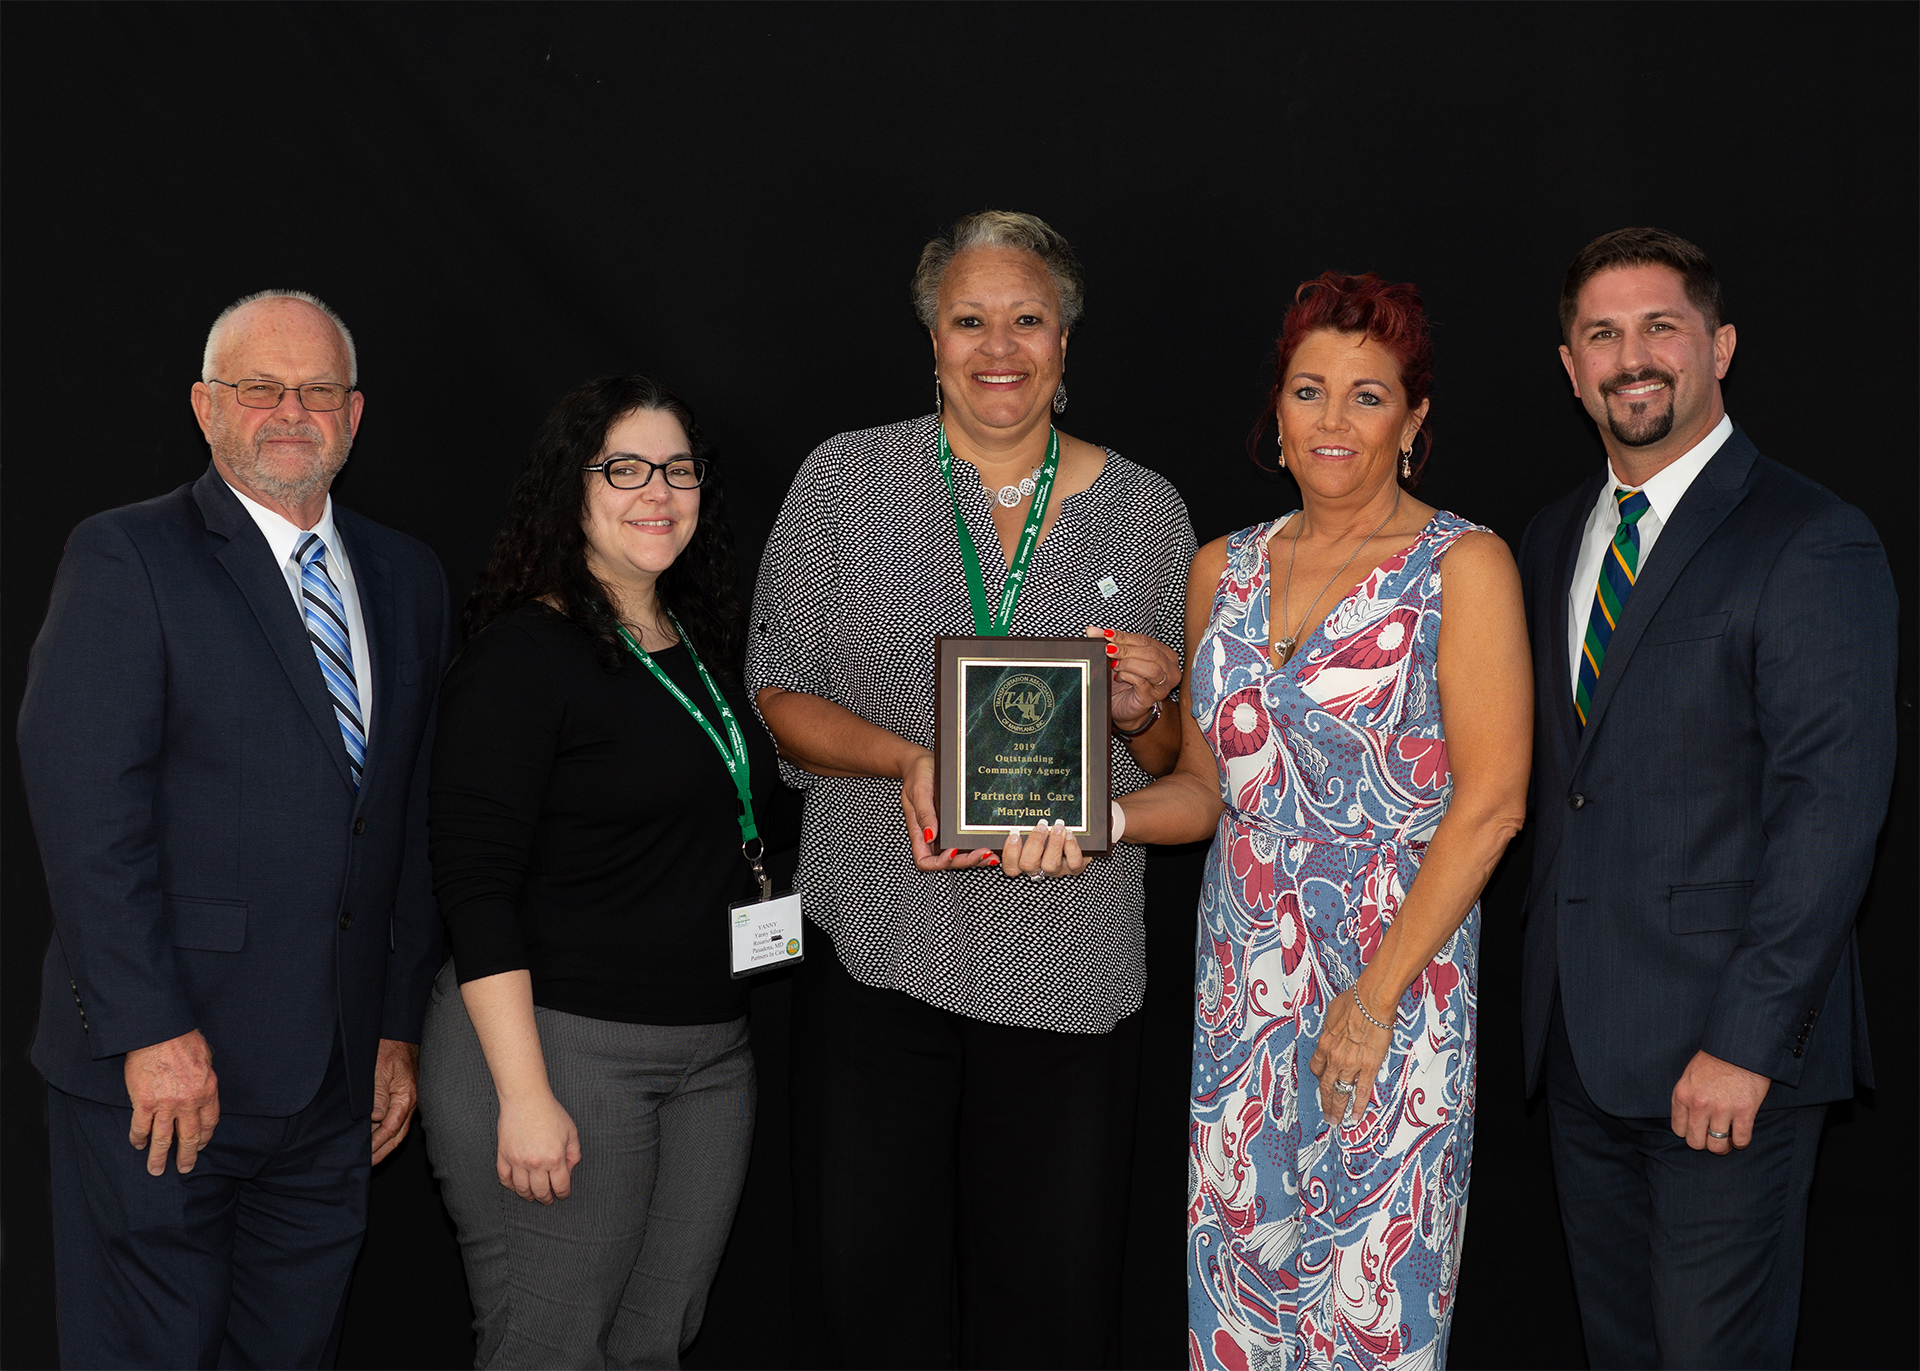 Partners in Care: Outstanding Community Agency 2019